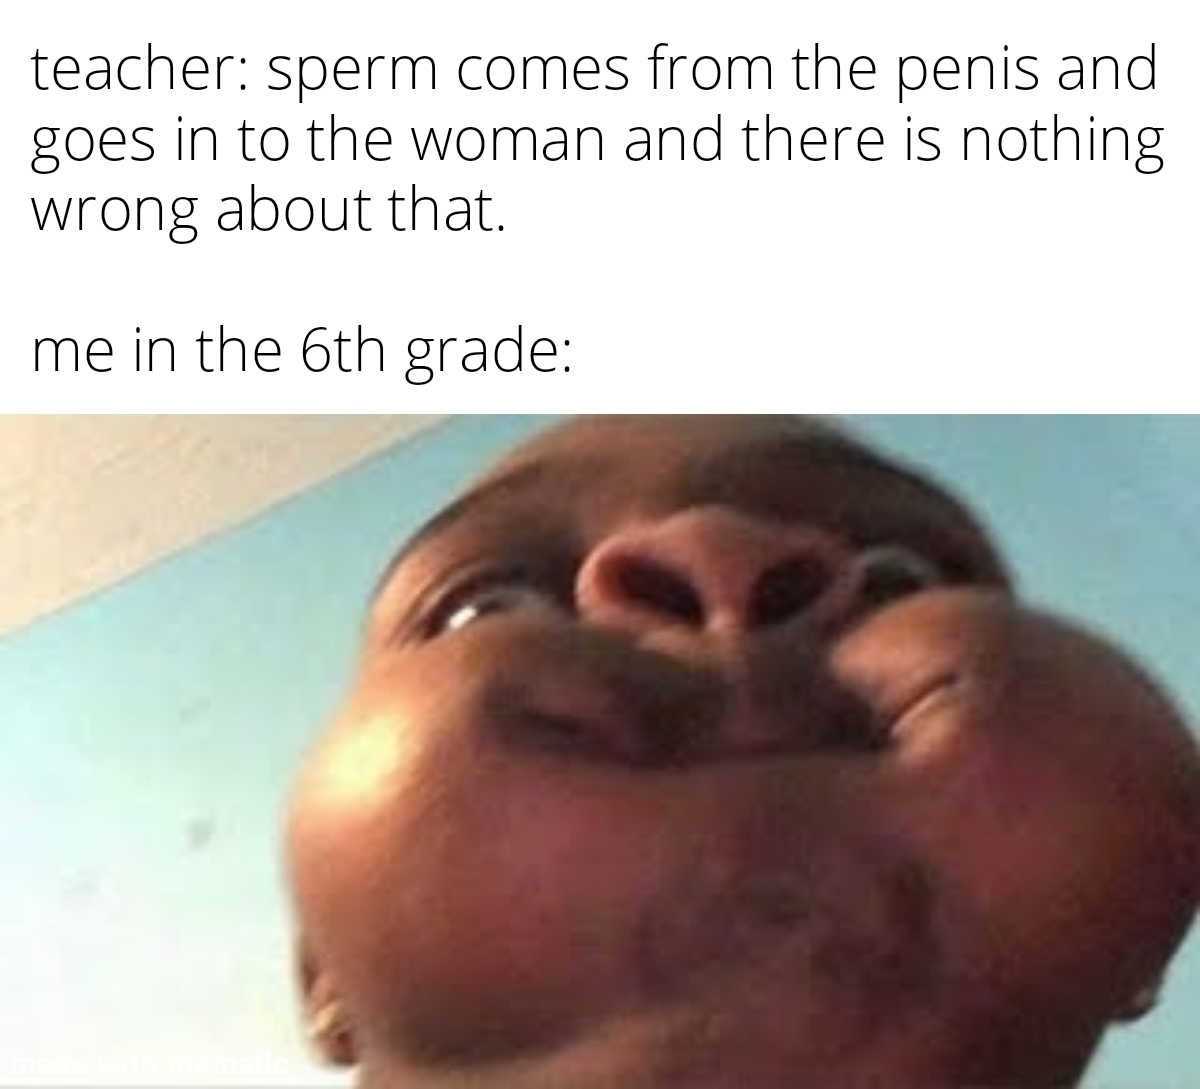 dank memes - funny memes - cant stop laughing meme - teacher sperm comes from the penis and goes in to the woman and there is nothing wrong about that. me in the 6th grade